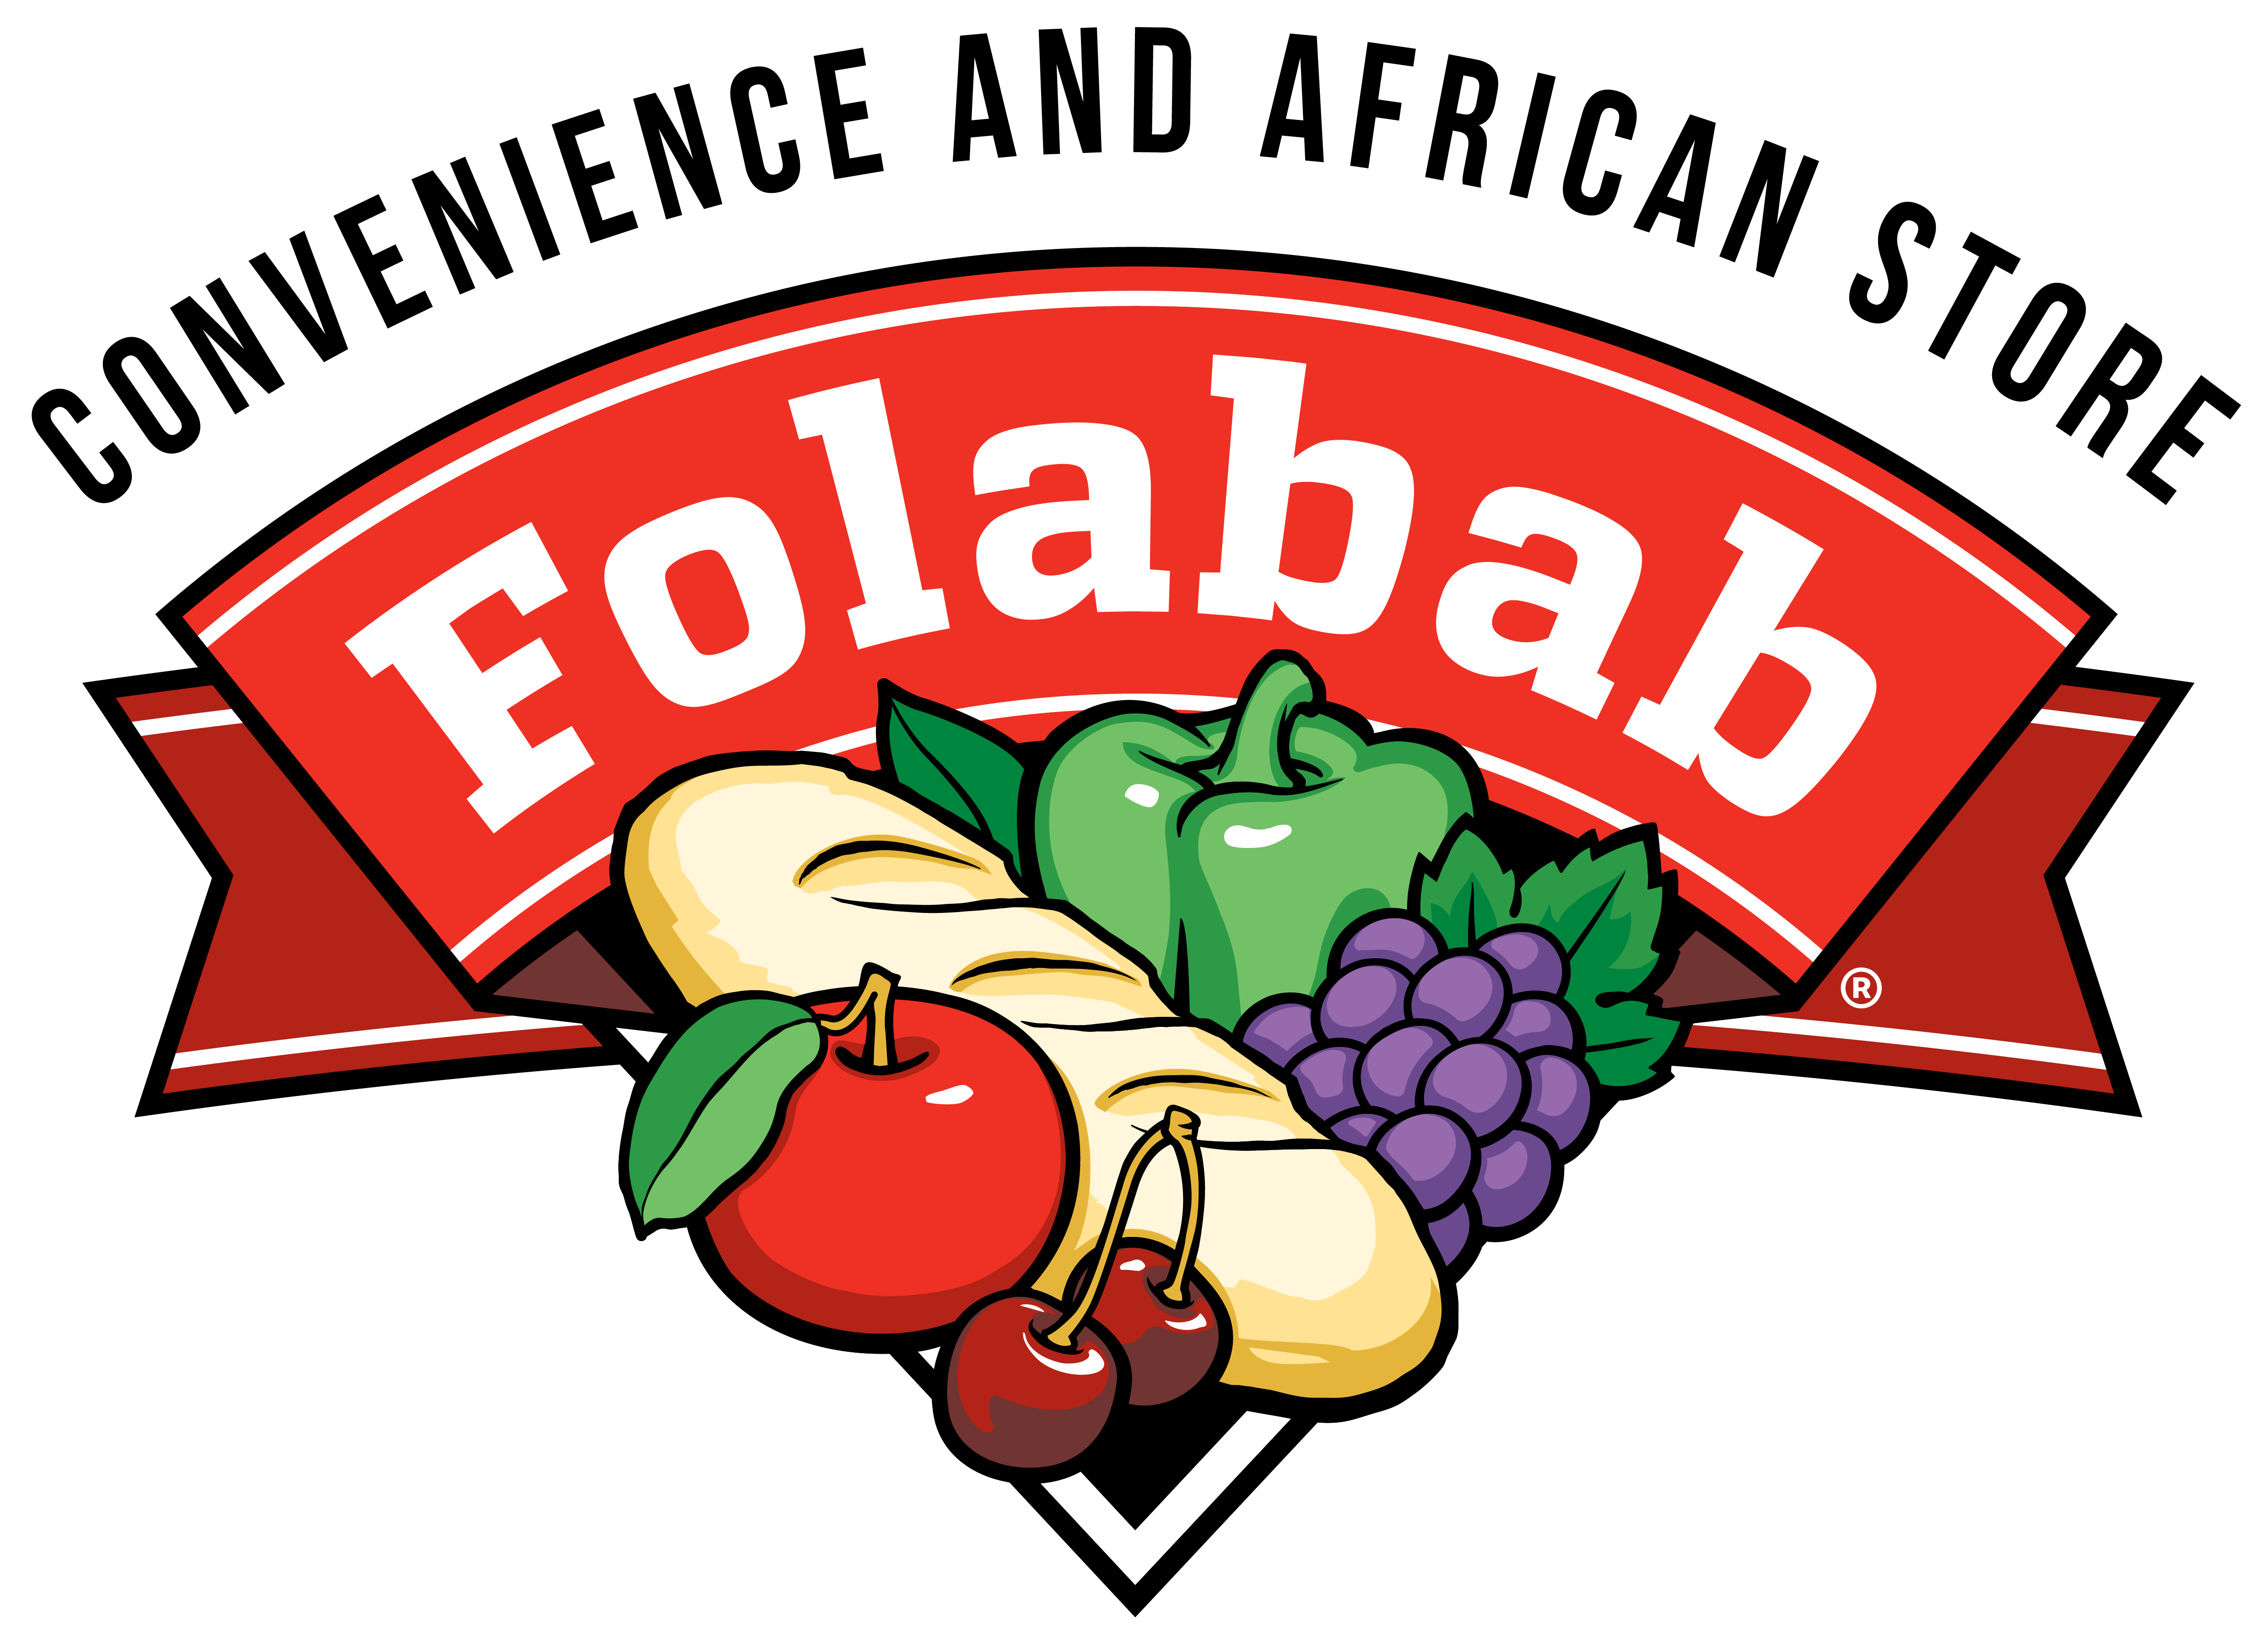 Folabab Convenient and African Market | Authentic African Foods